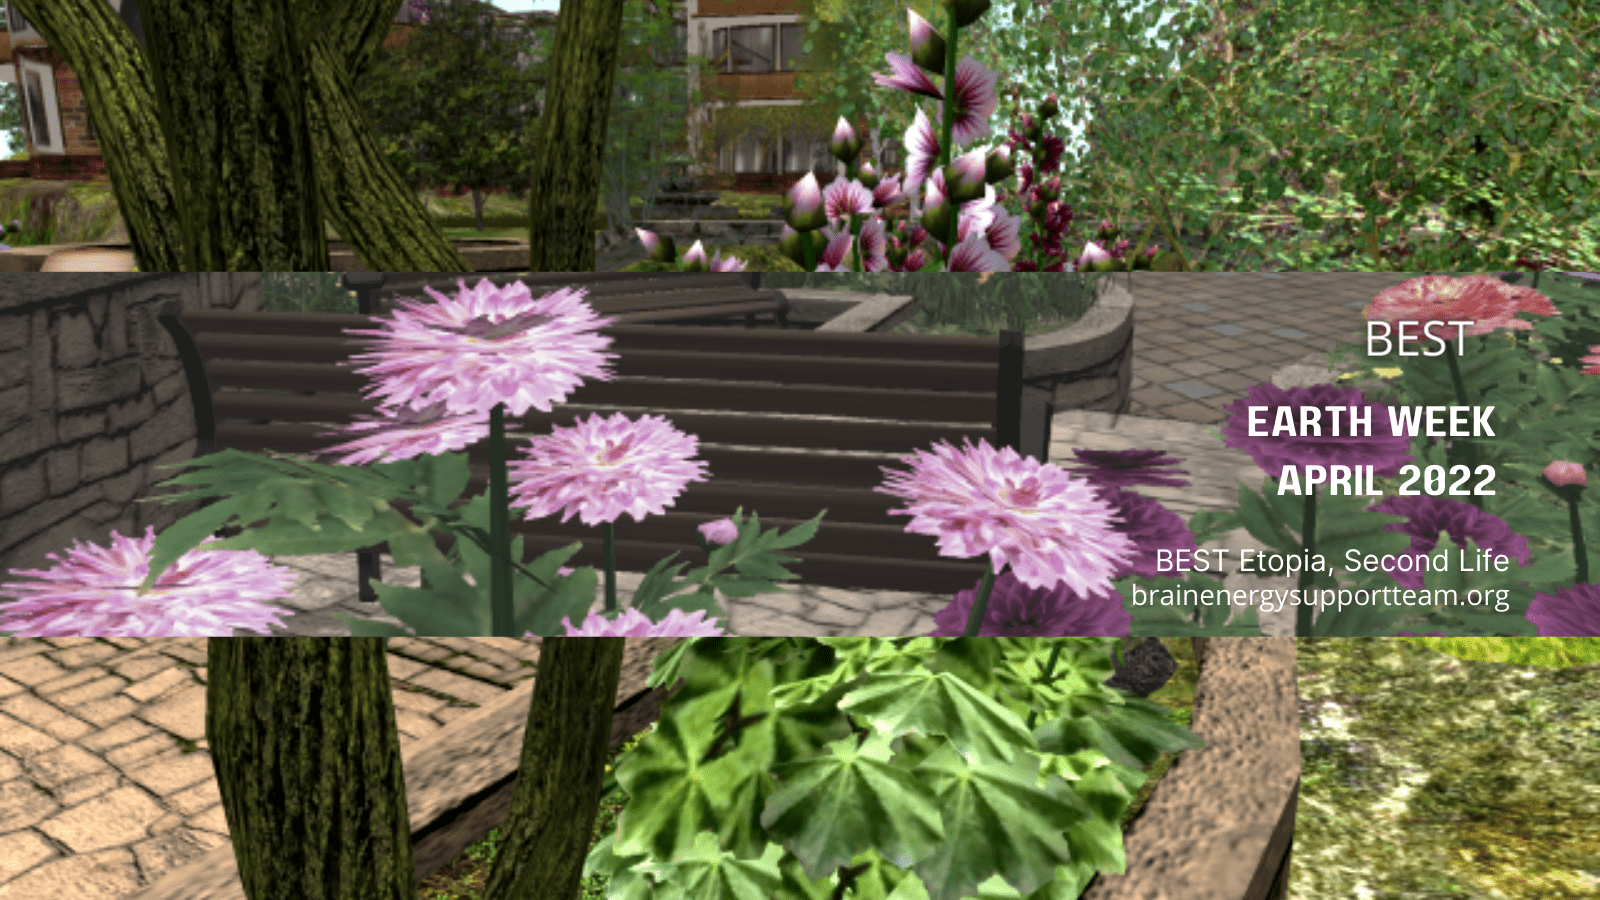 A collage of spring flowers developed in the Second Life virtual platform